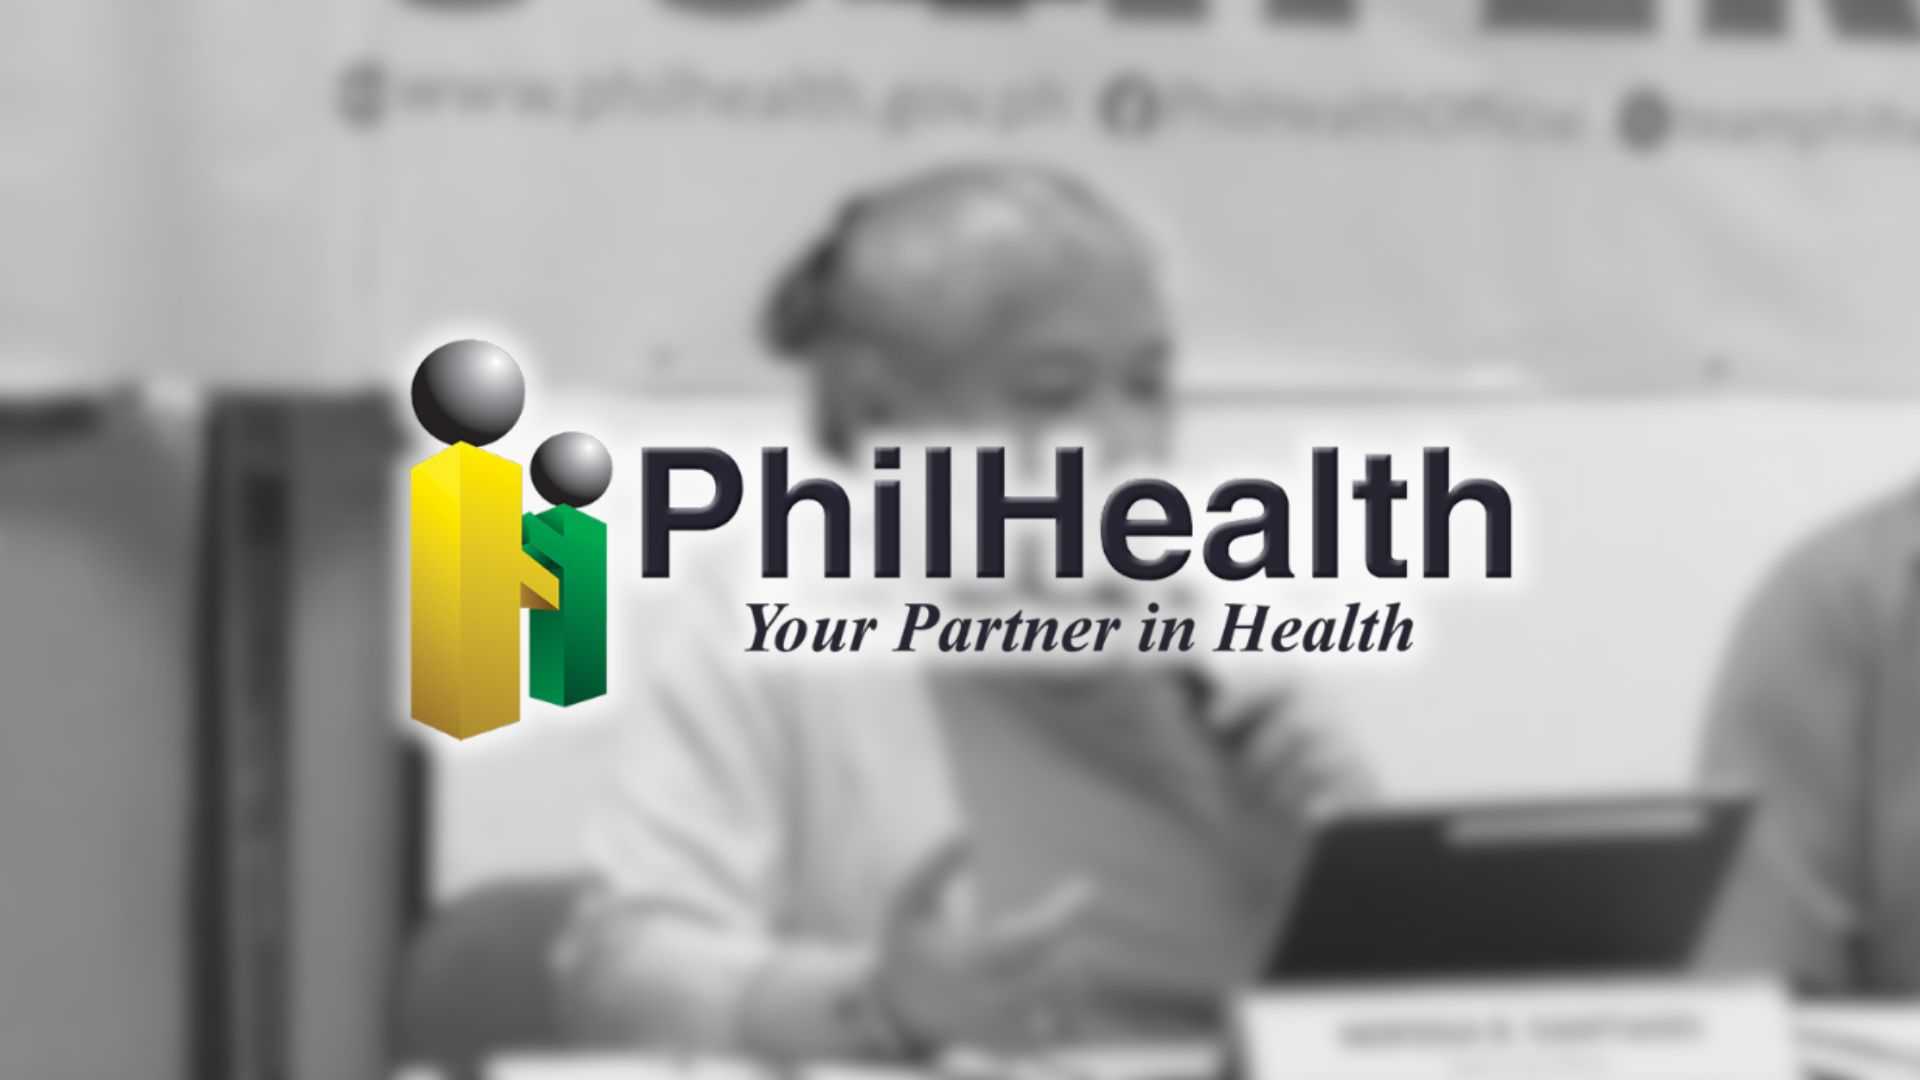 13 to 20 million members’ data were compromised – PhilHealth